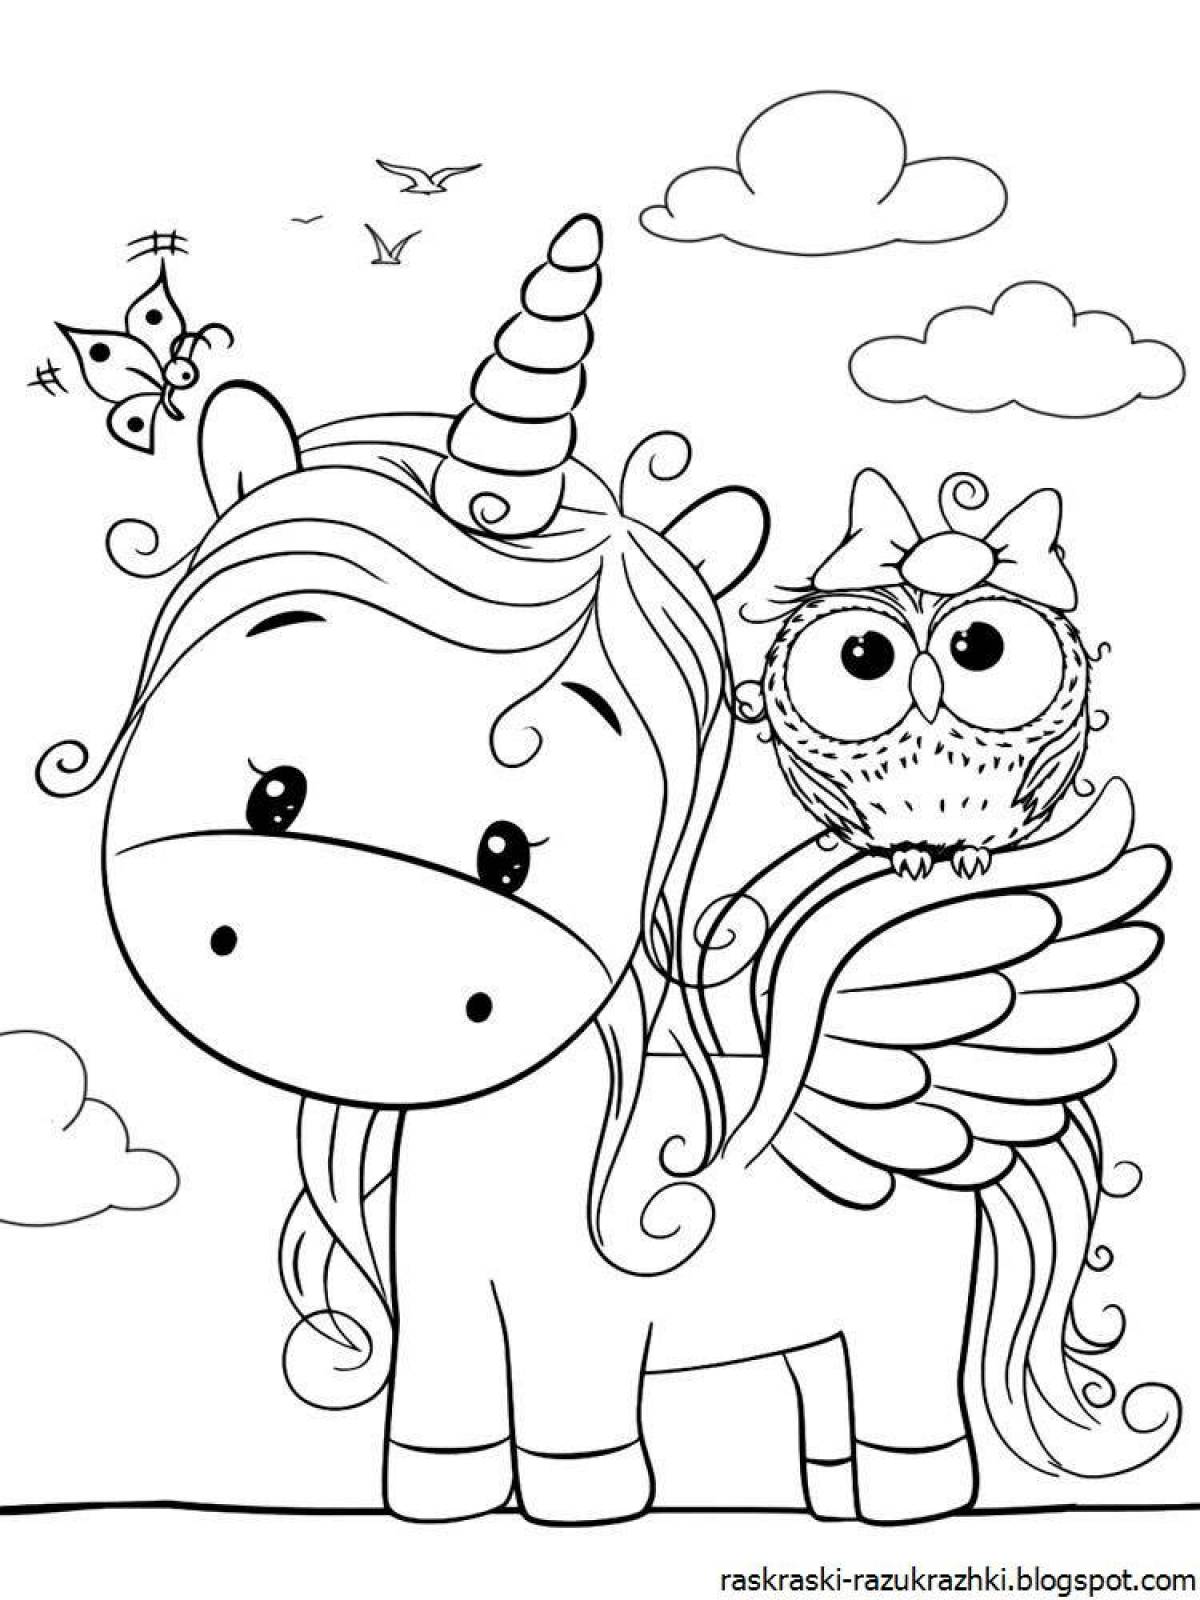 Dreamy unicorn coloring book for kids 6-7 years old